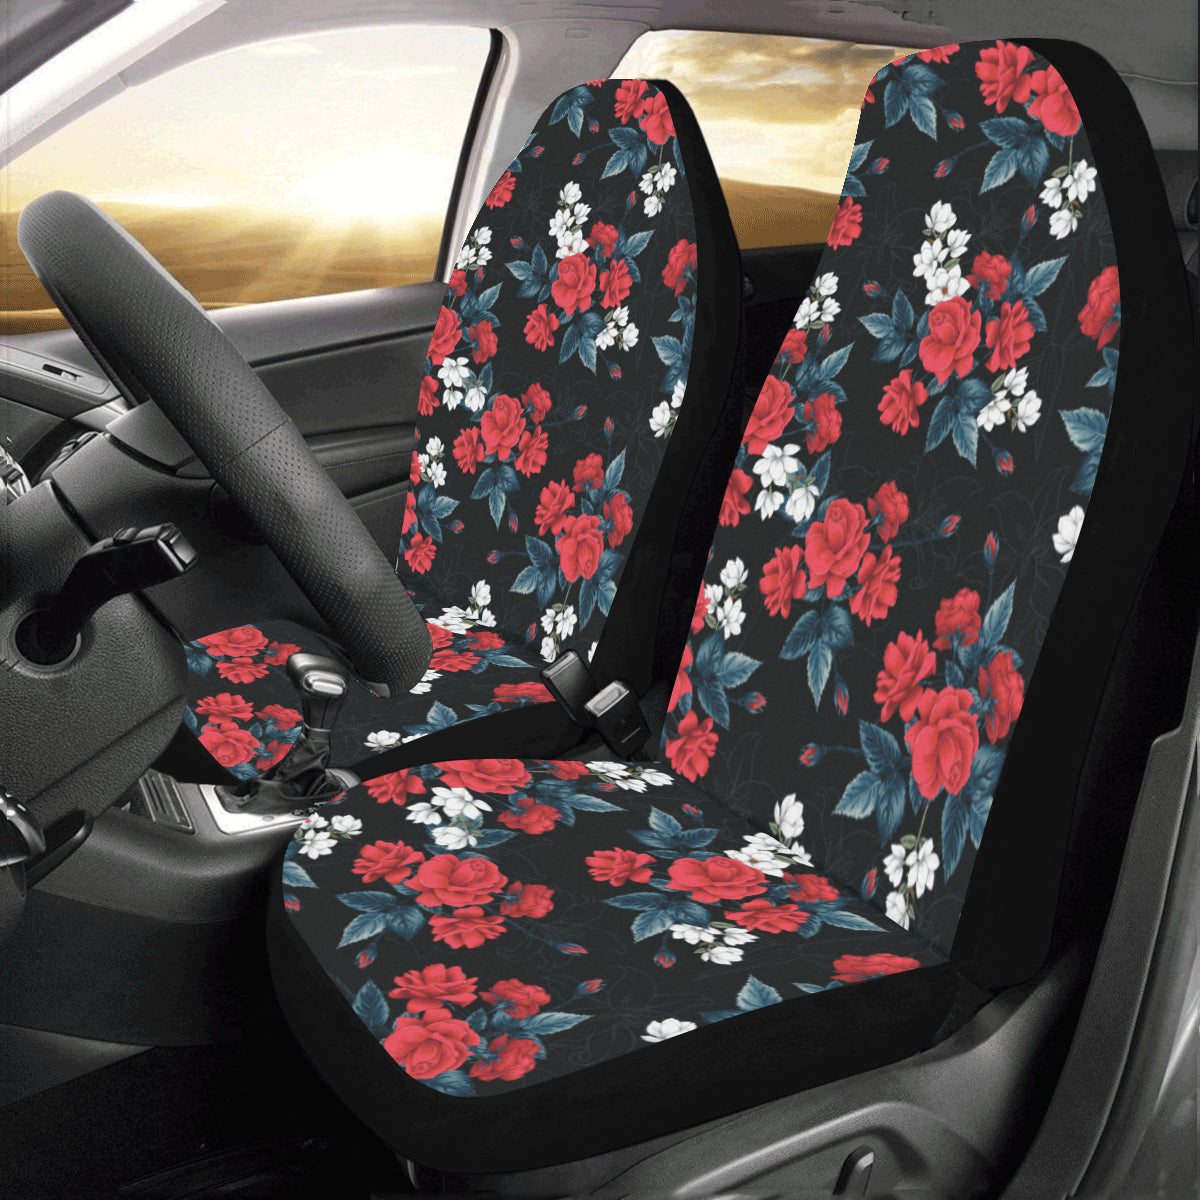 Red Roses Car Seat Cover 2 pc, Floral Pretty Magnolia Front Seat Covers, Car SUV Vans Seat Protector Accessory Starcove Fashion